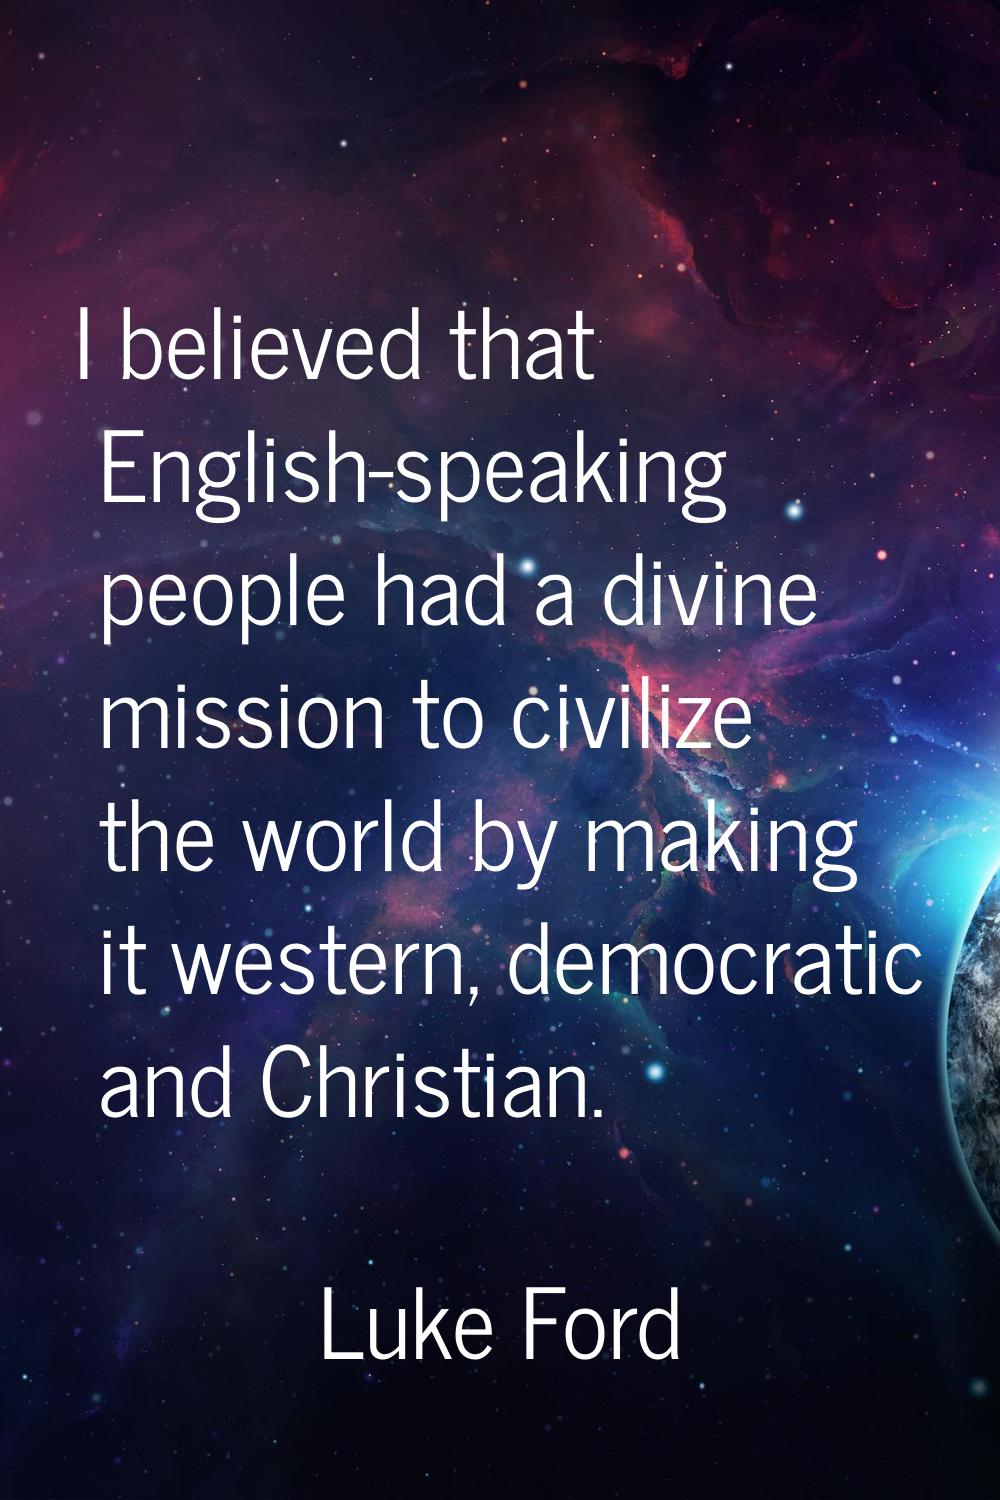 I believed that English-speaking people had a divine mission to civilize the world by making it wes